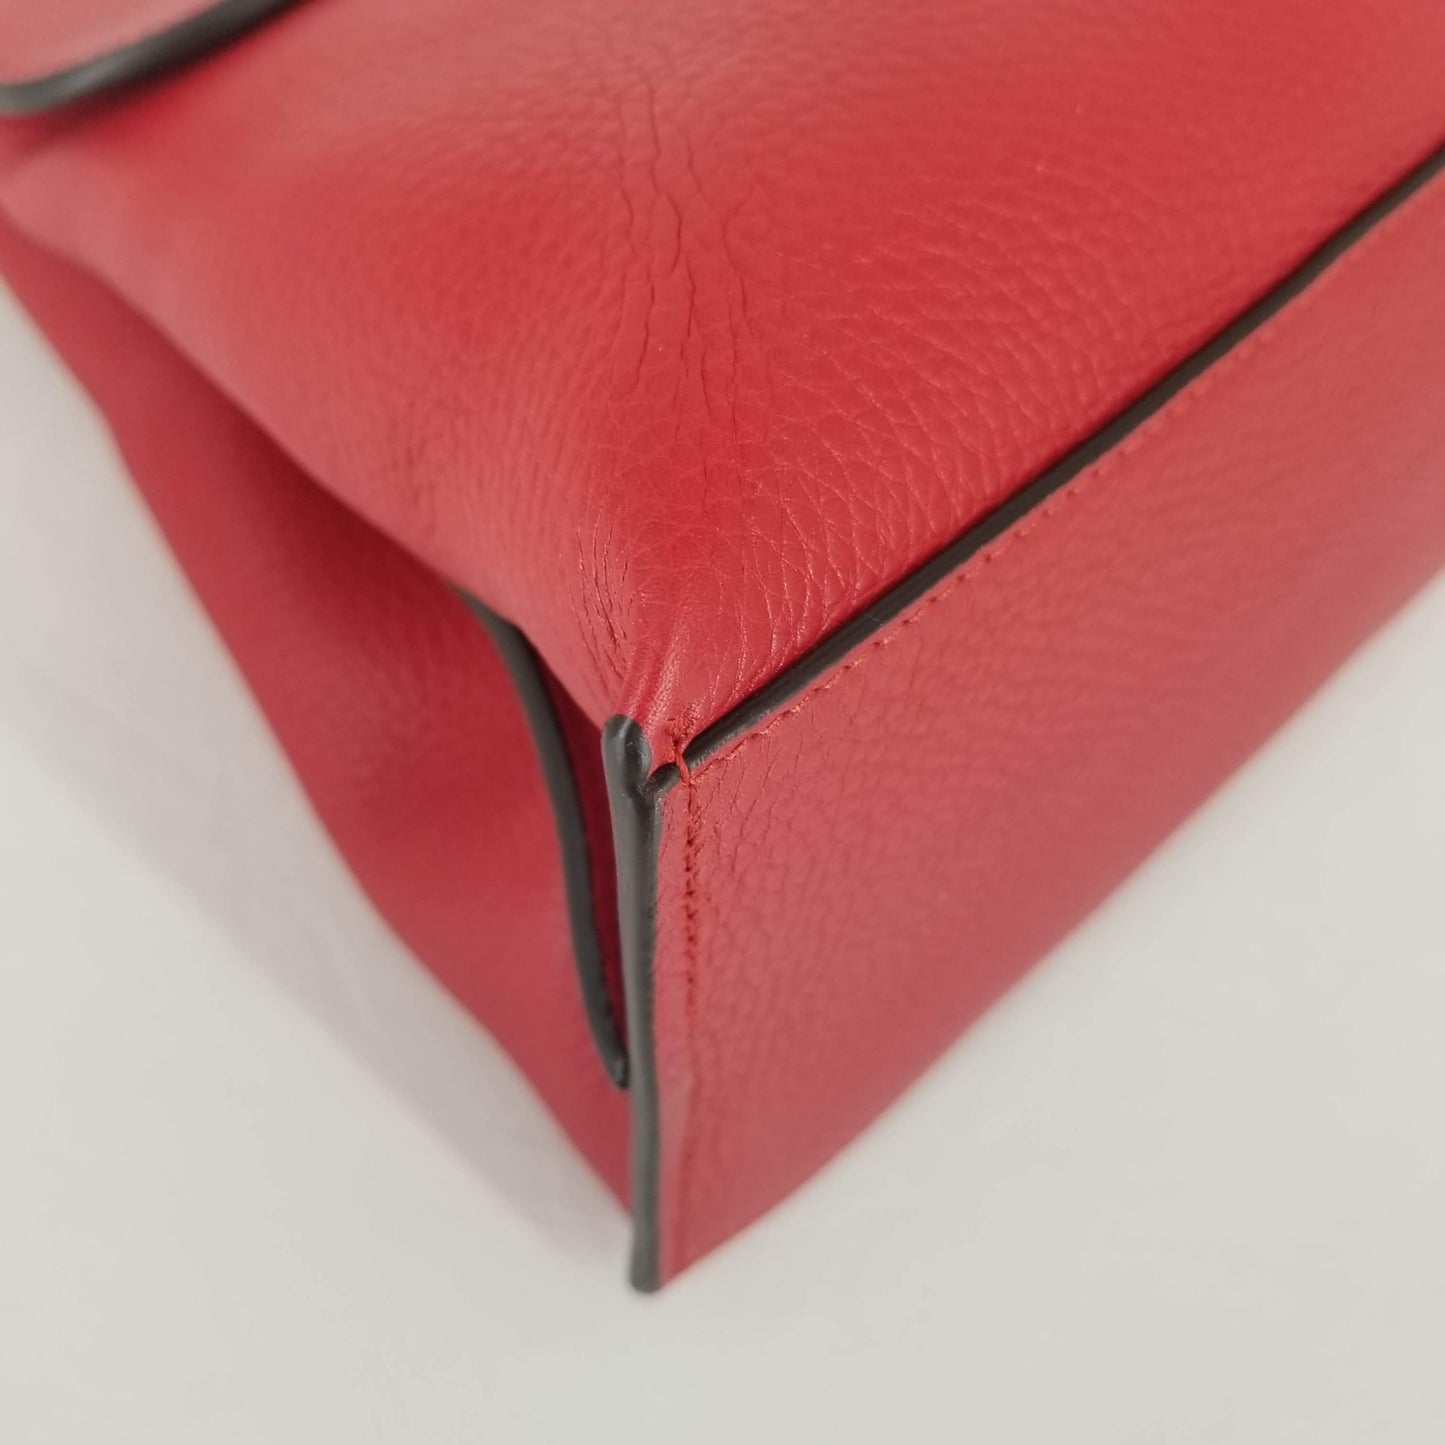 Authentic Gucci Red Leather Bamboo Flap